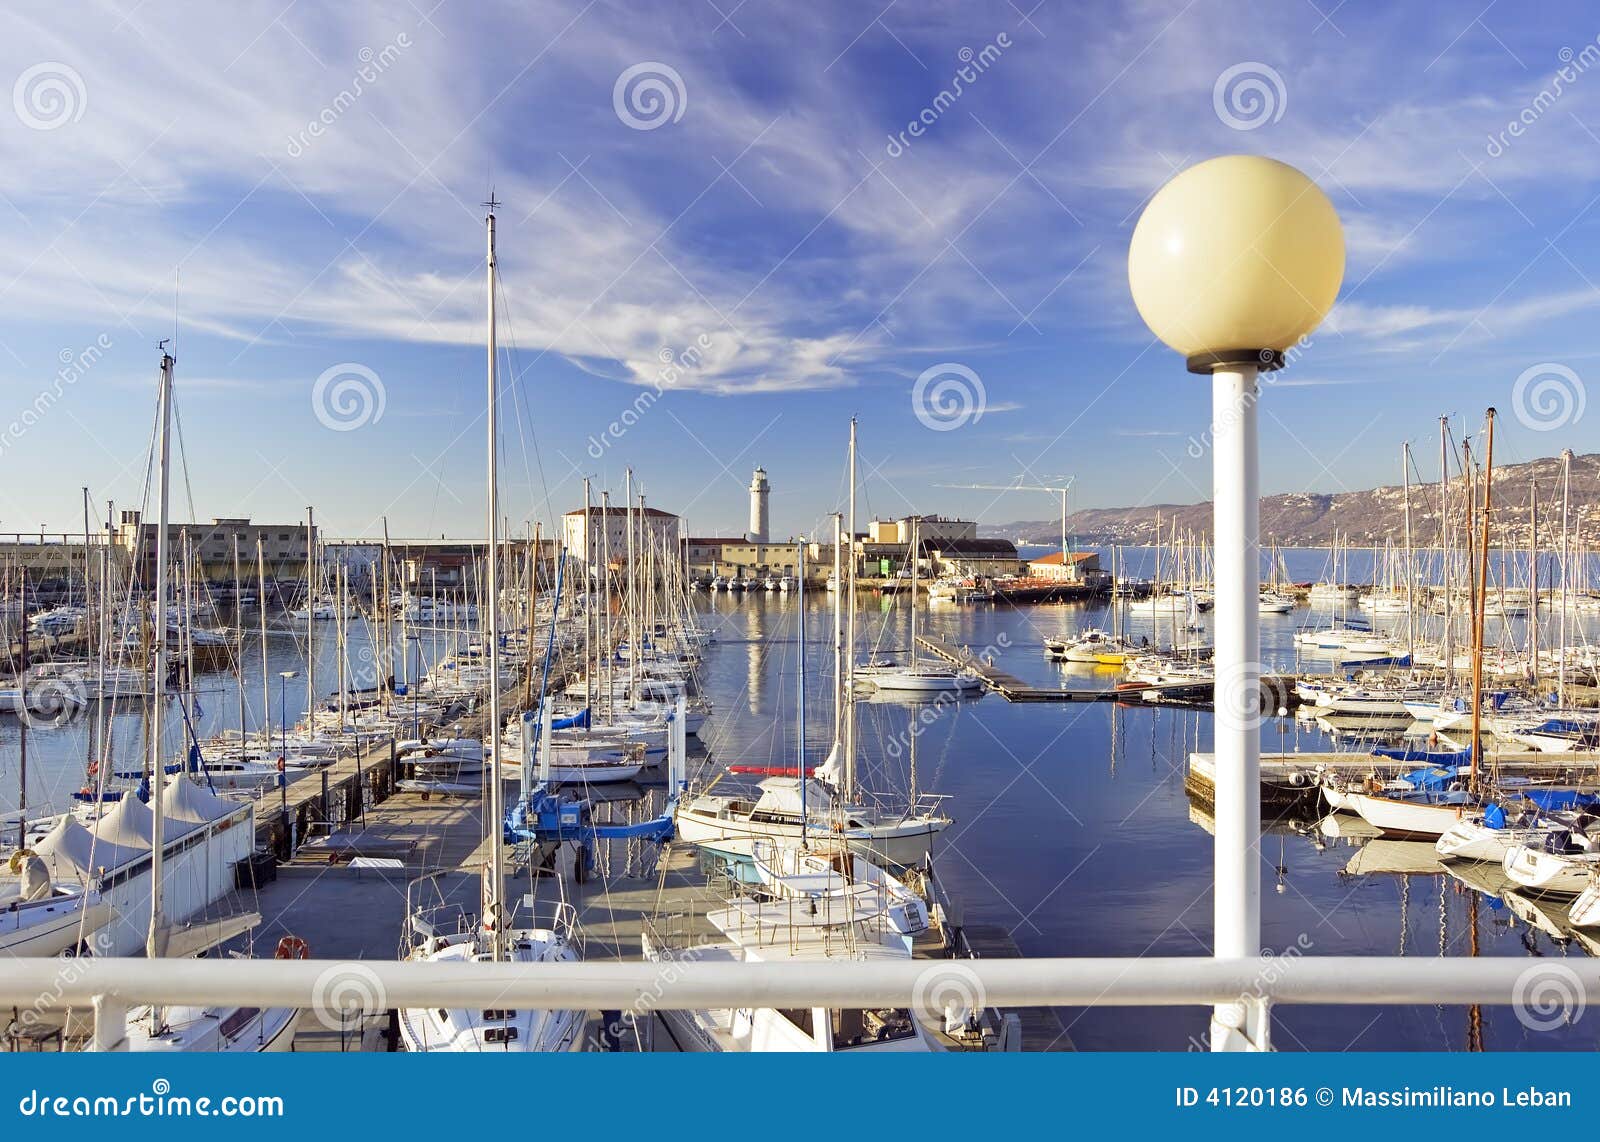 Sailboats in harbour stock photo. Image of coast, boats - 4120186